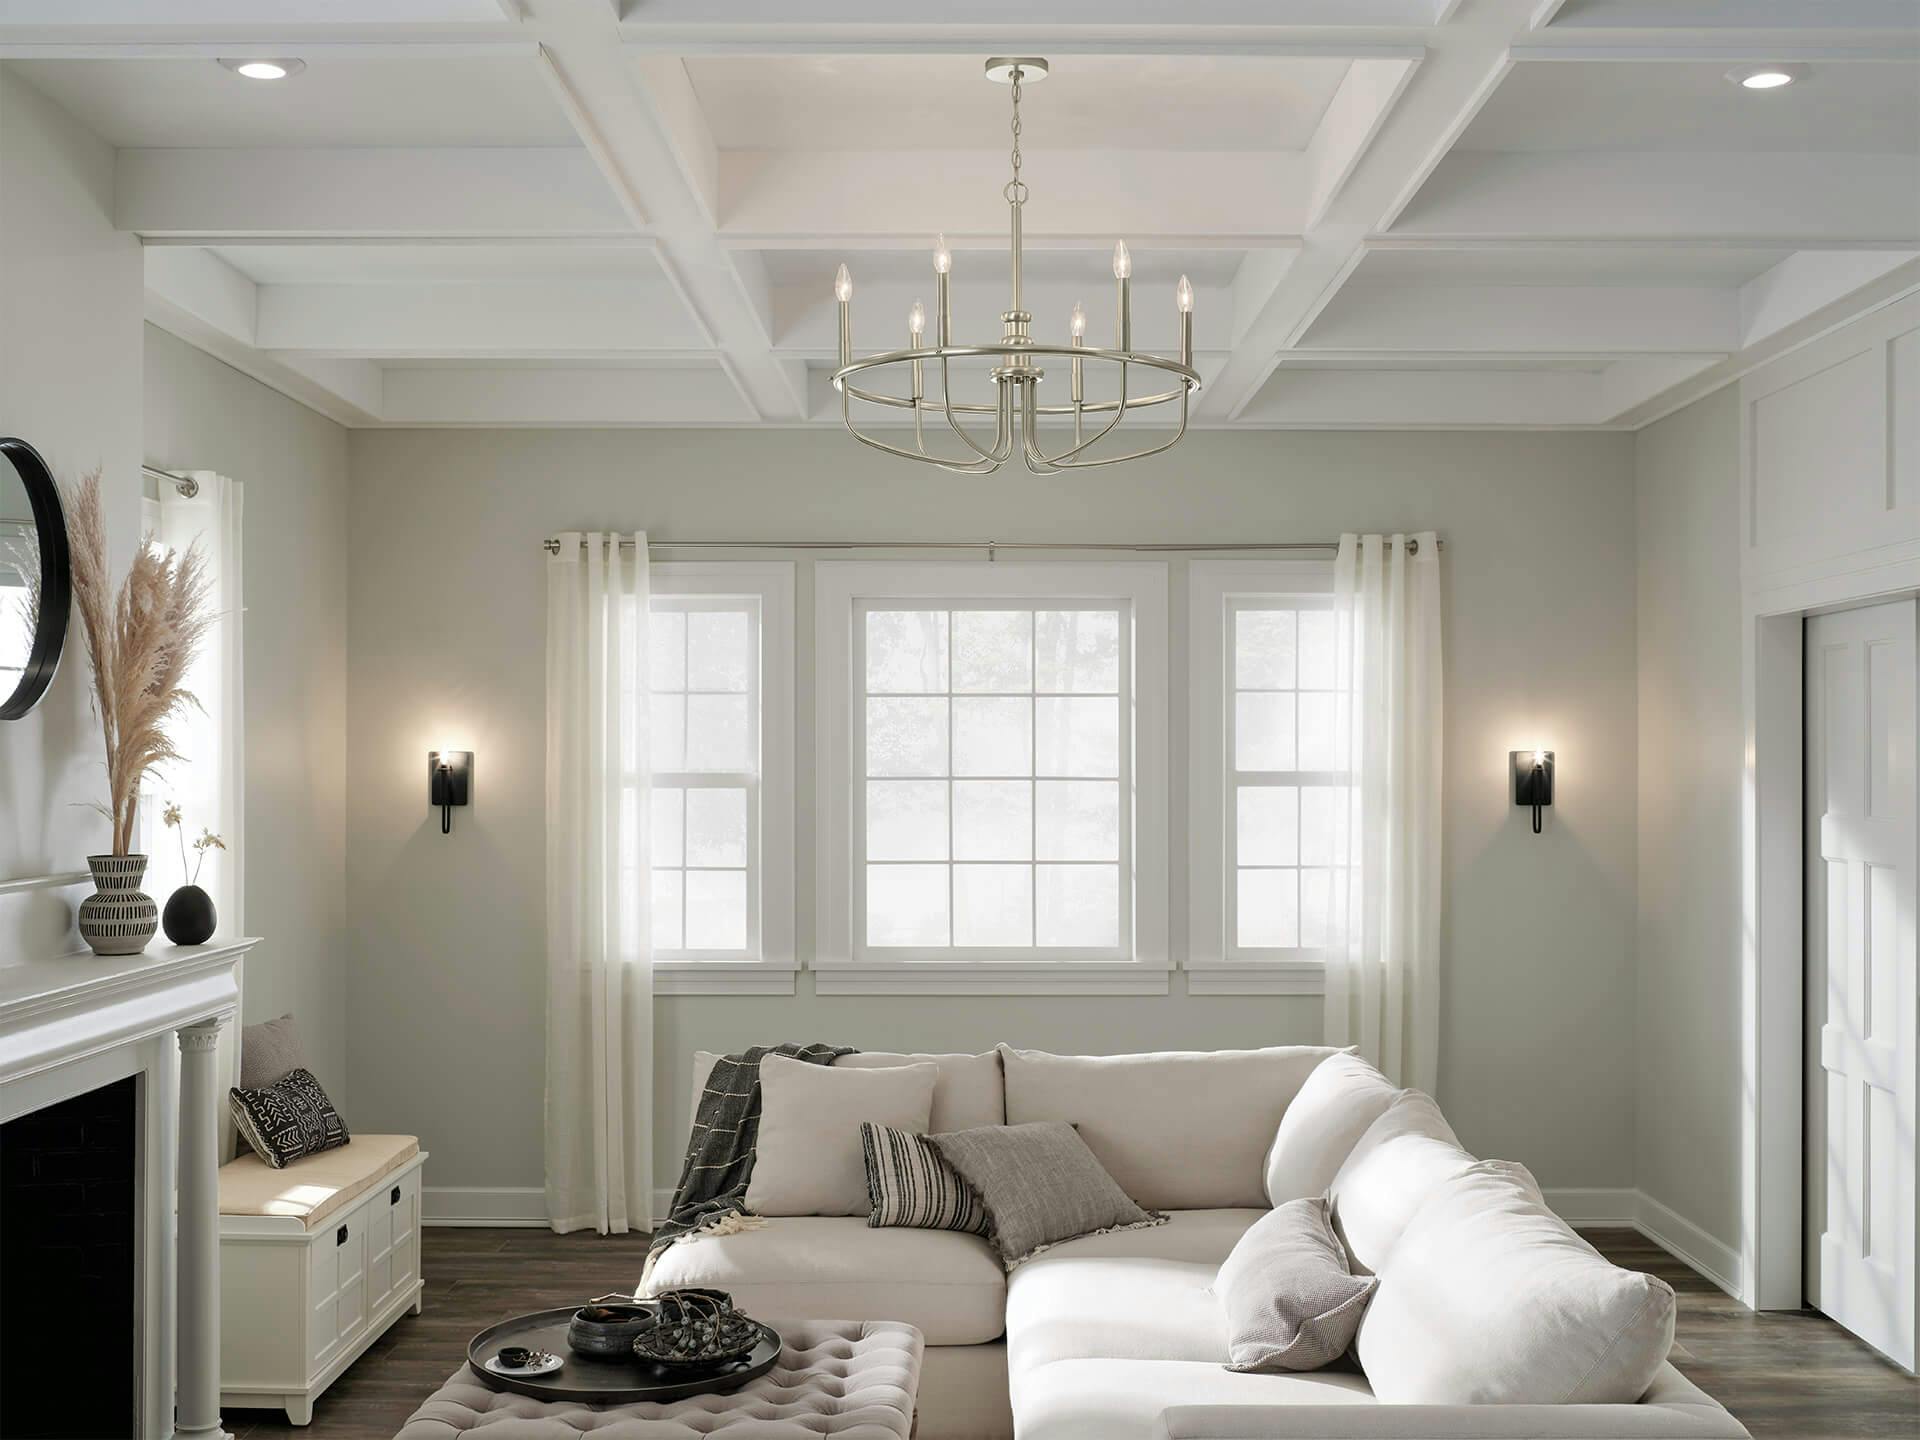 Living room in the daylight featuring Adlen chandelier lights